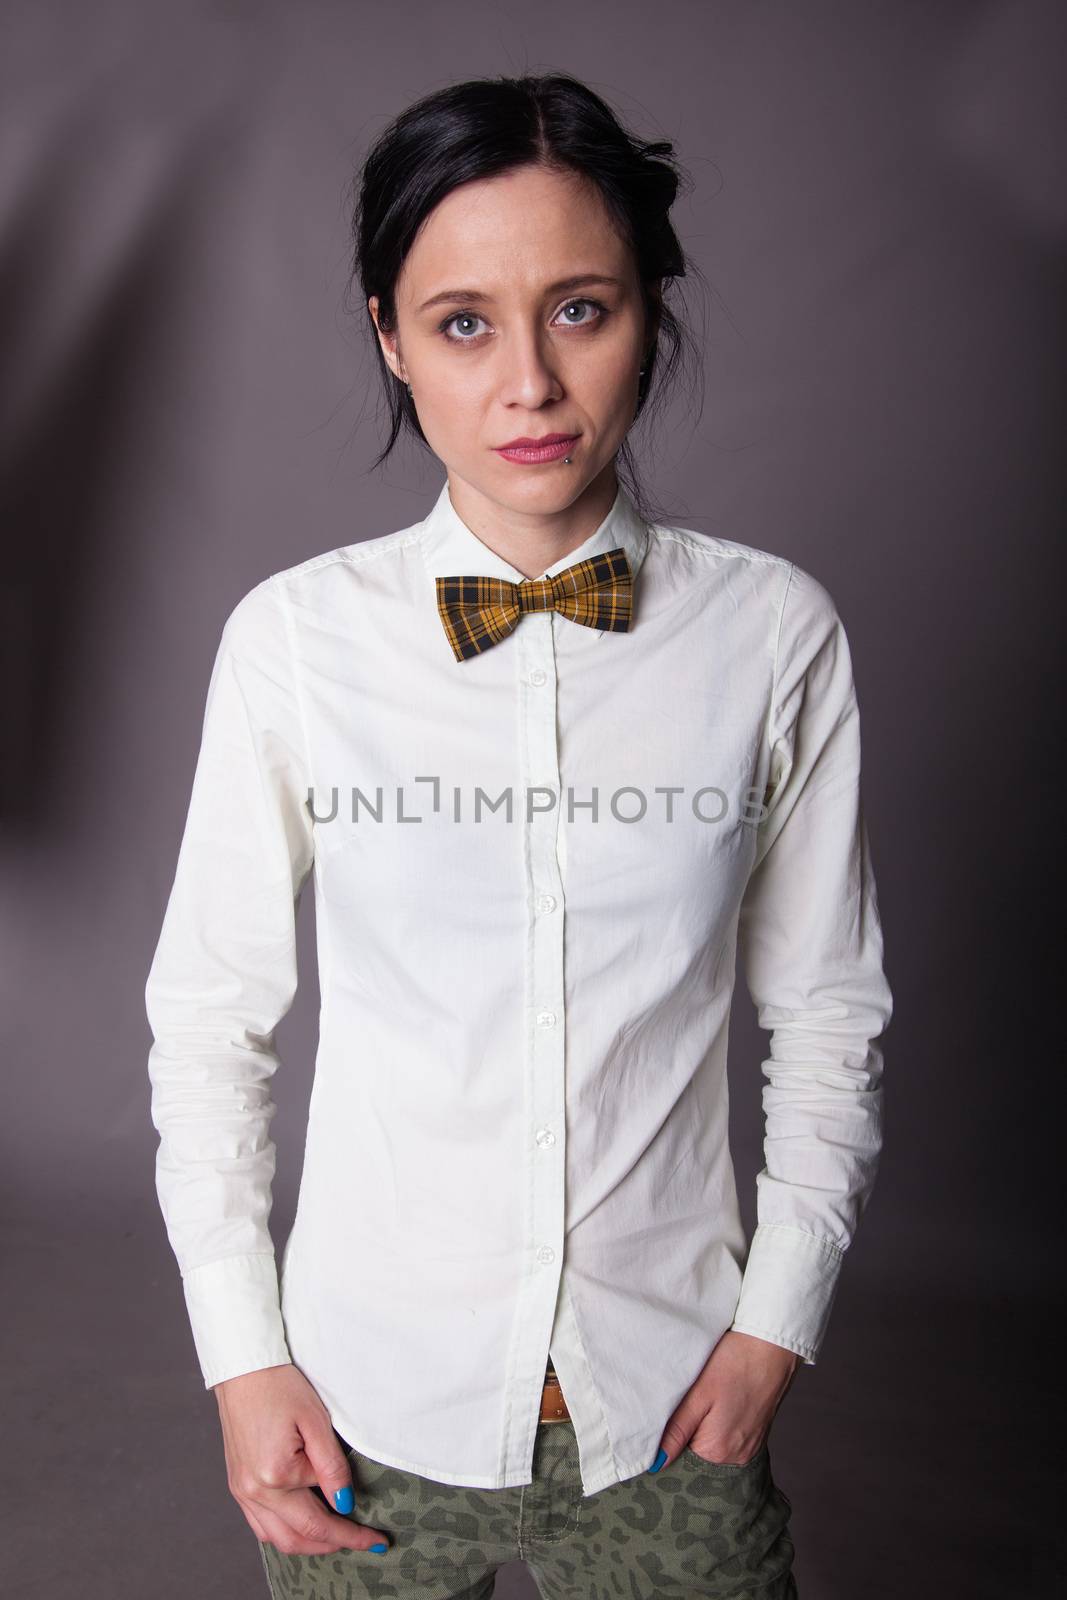 Girl brunette office worker with bow tie by traza